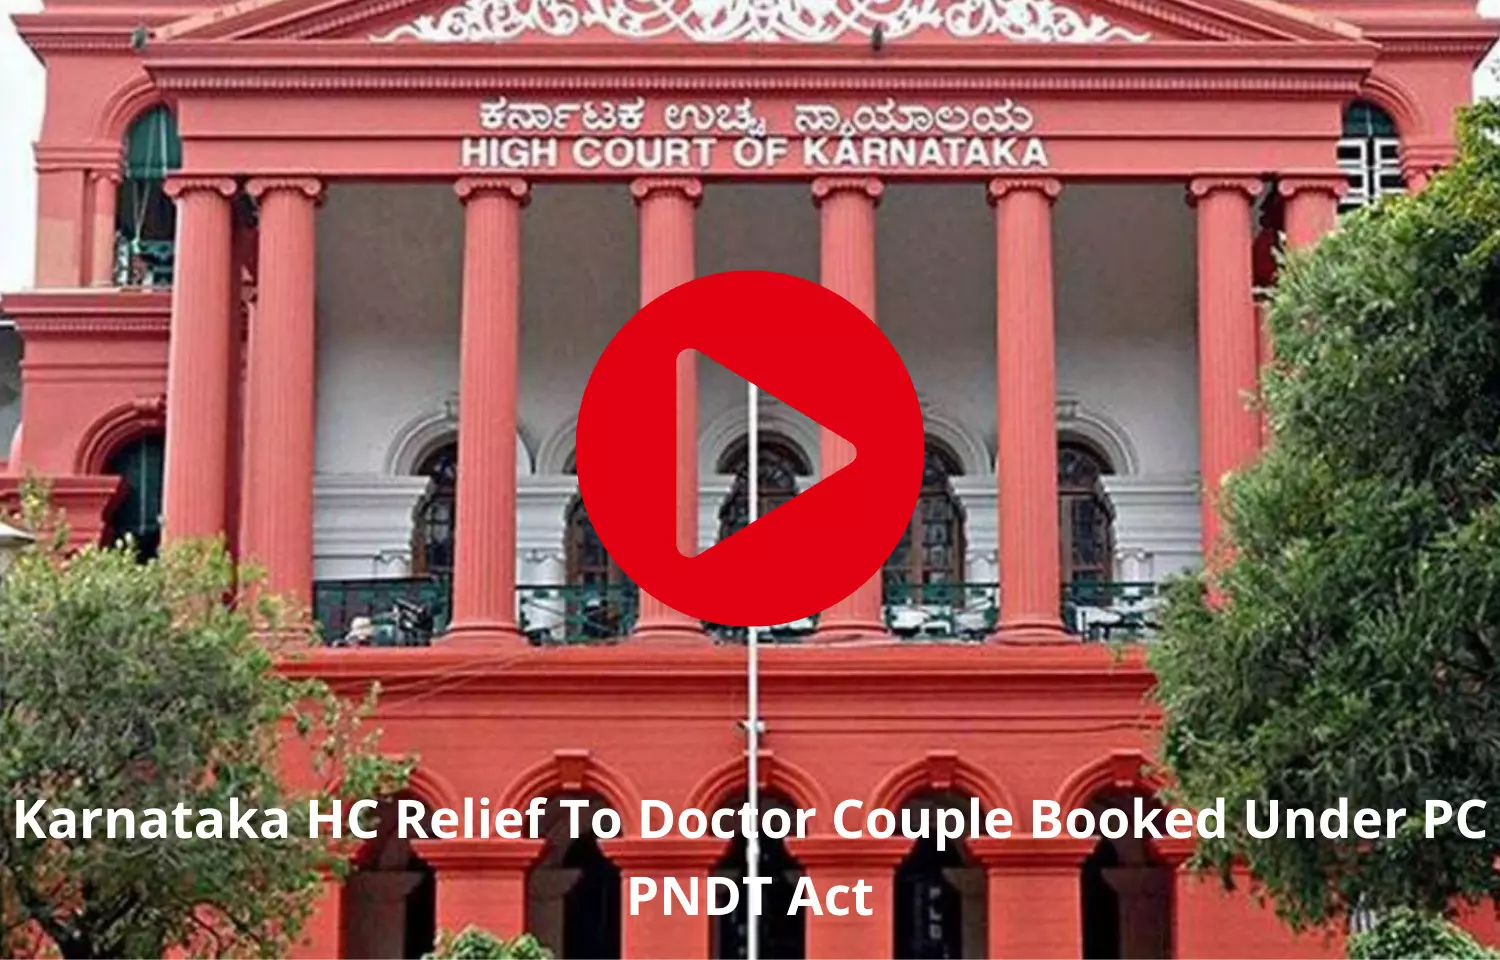 Karnataka HC Relief To Doctor Couple Booked Under PC PNDT Act